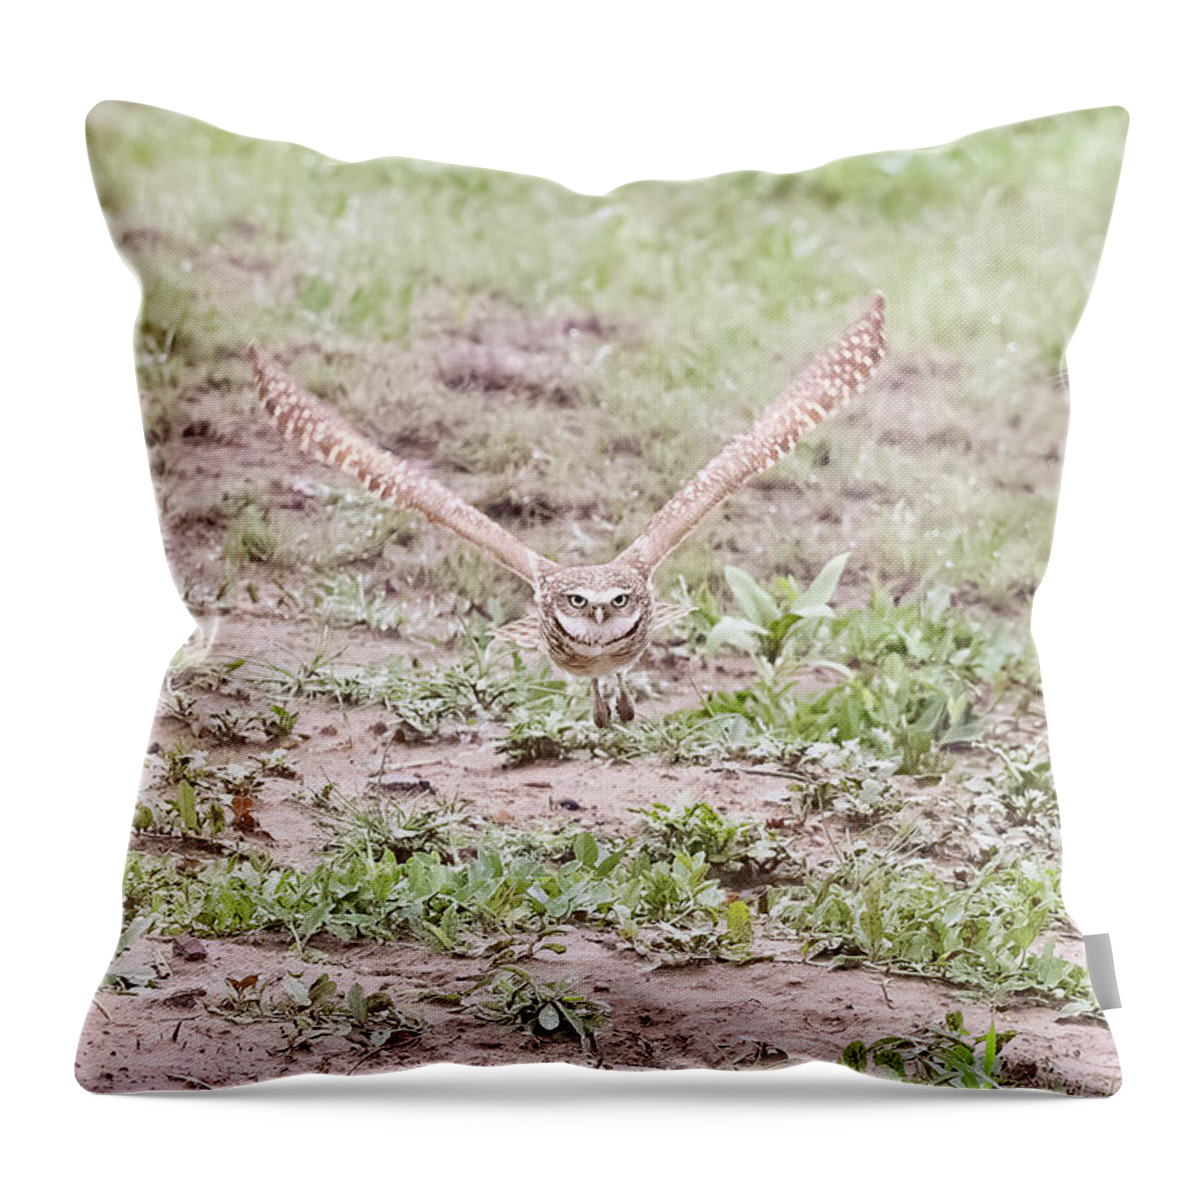 Owl Throw Pillow featuring the photograph Burrowing Owl Flies Head On by Tony Hake